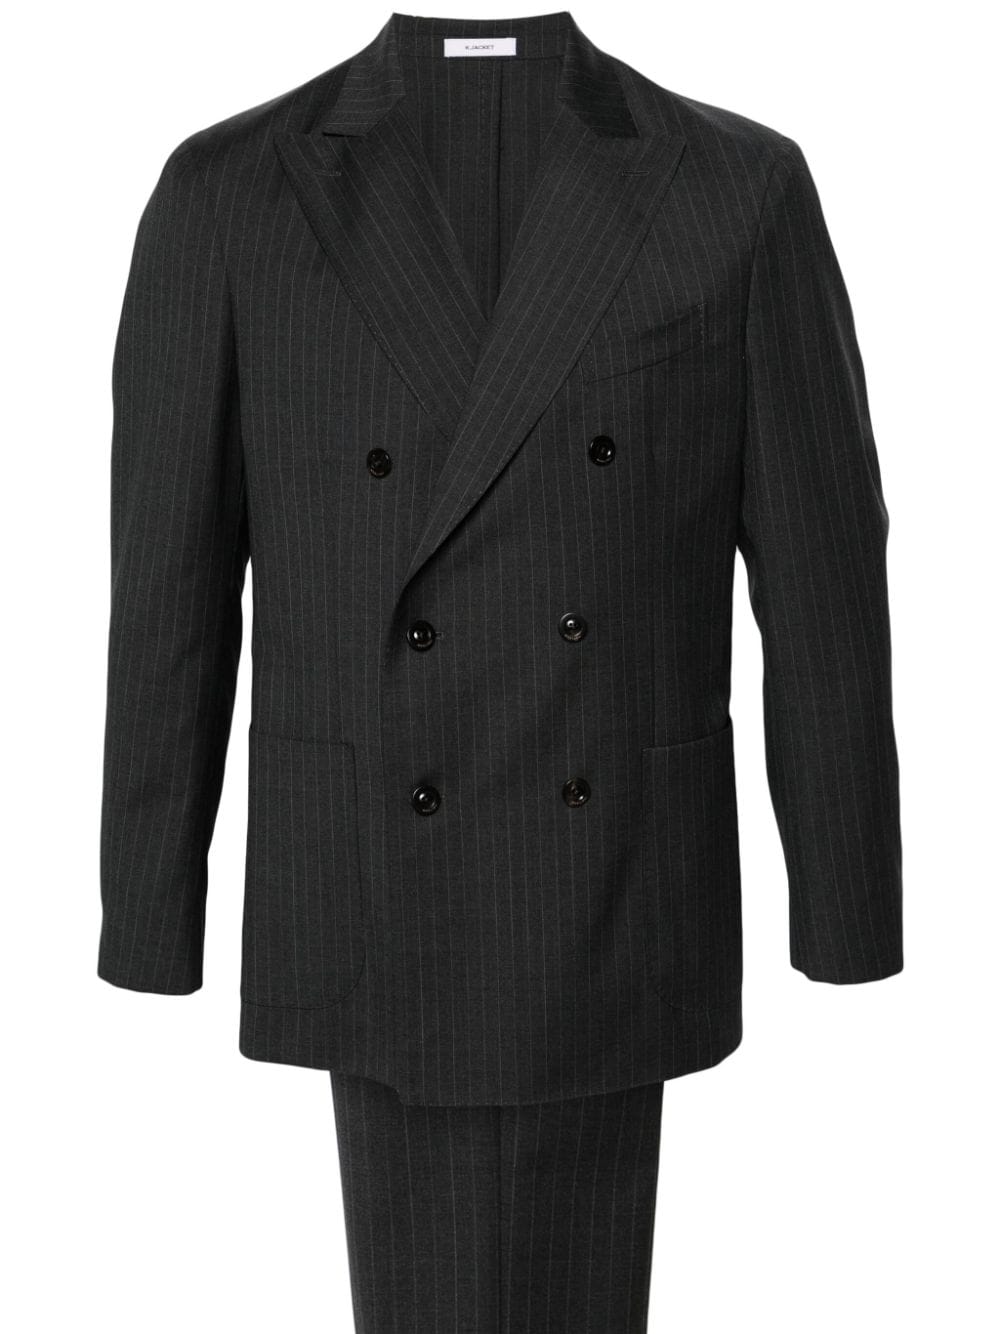 Double-breasted gray pinstriped suit